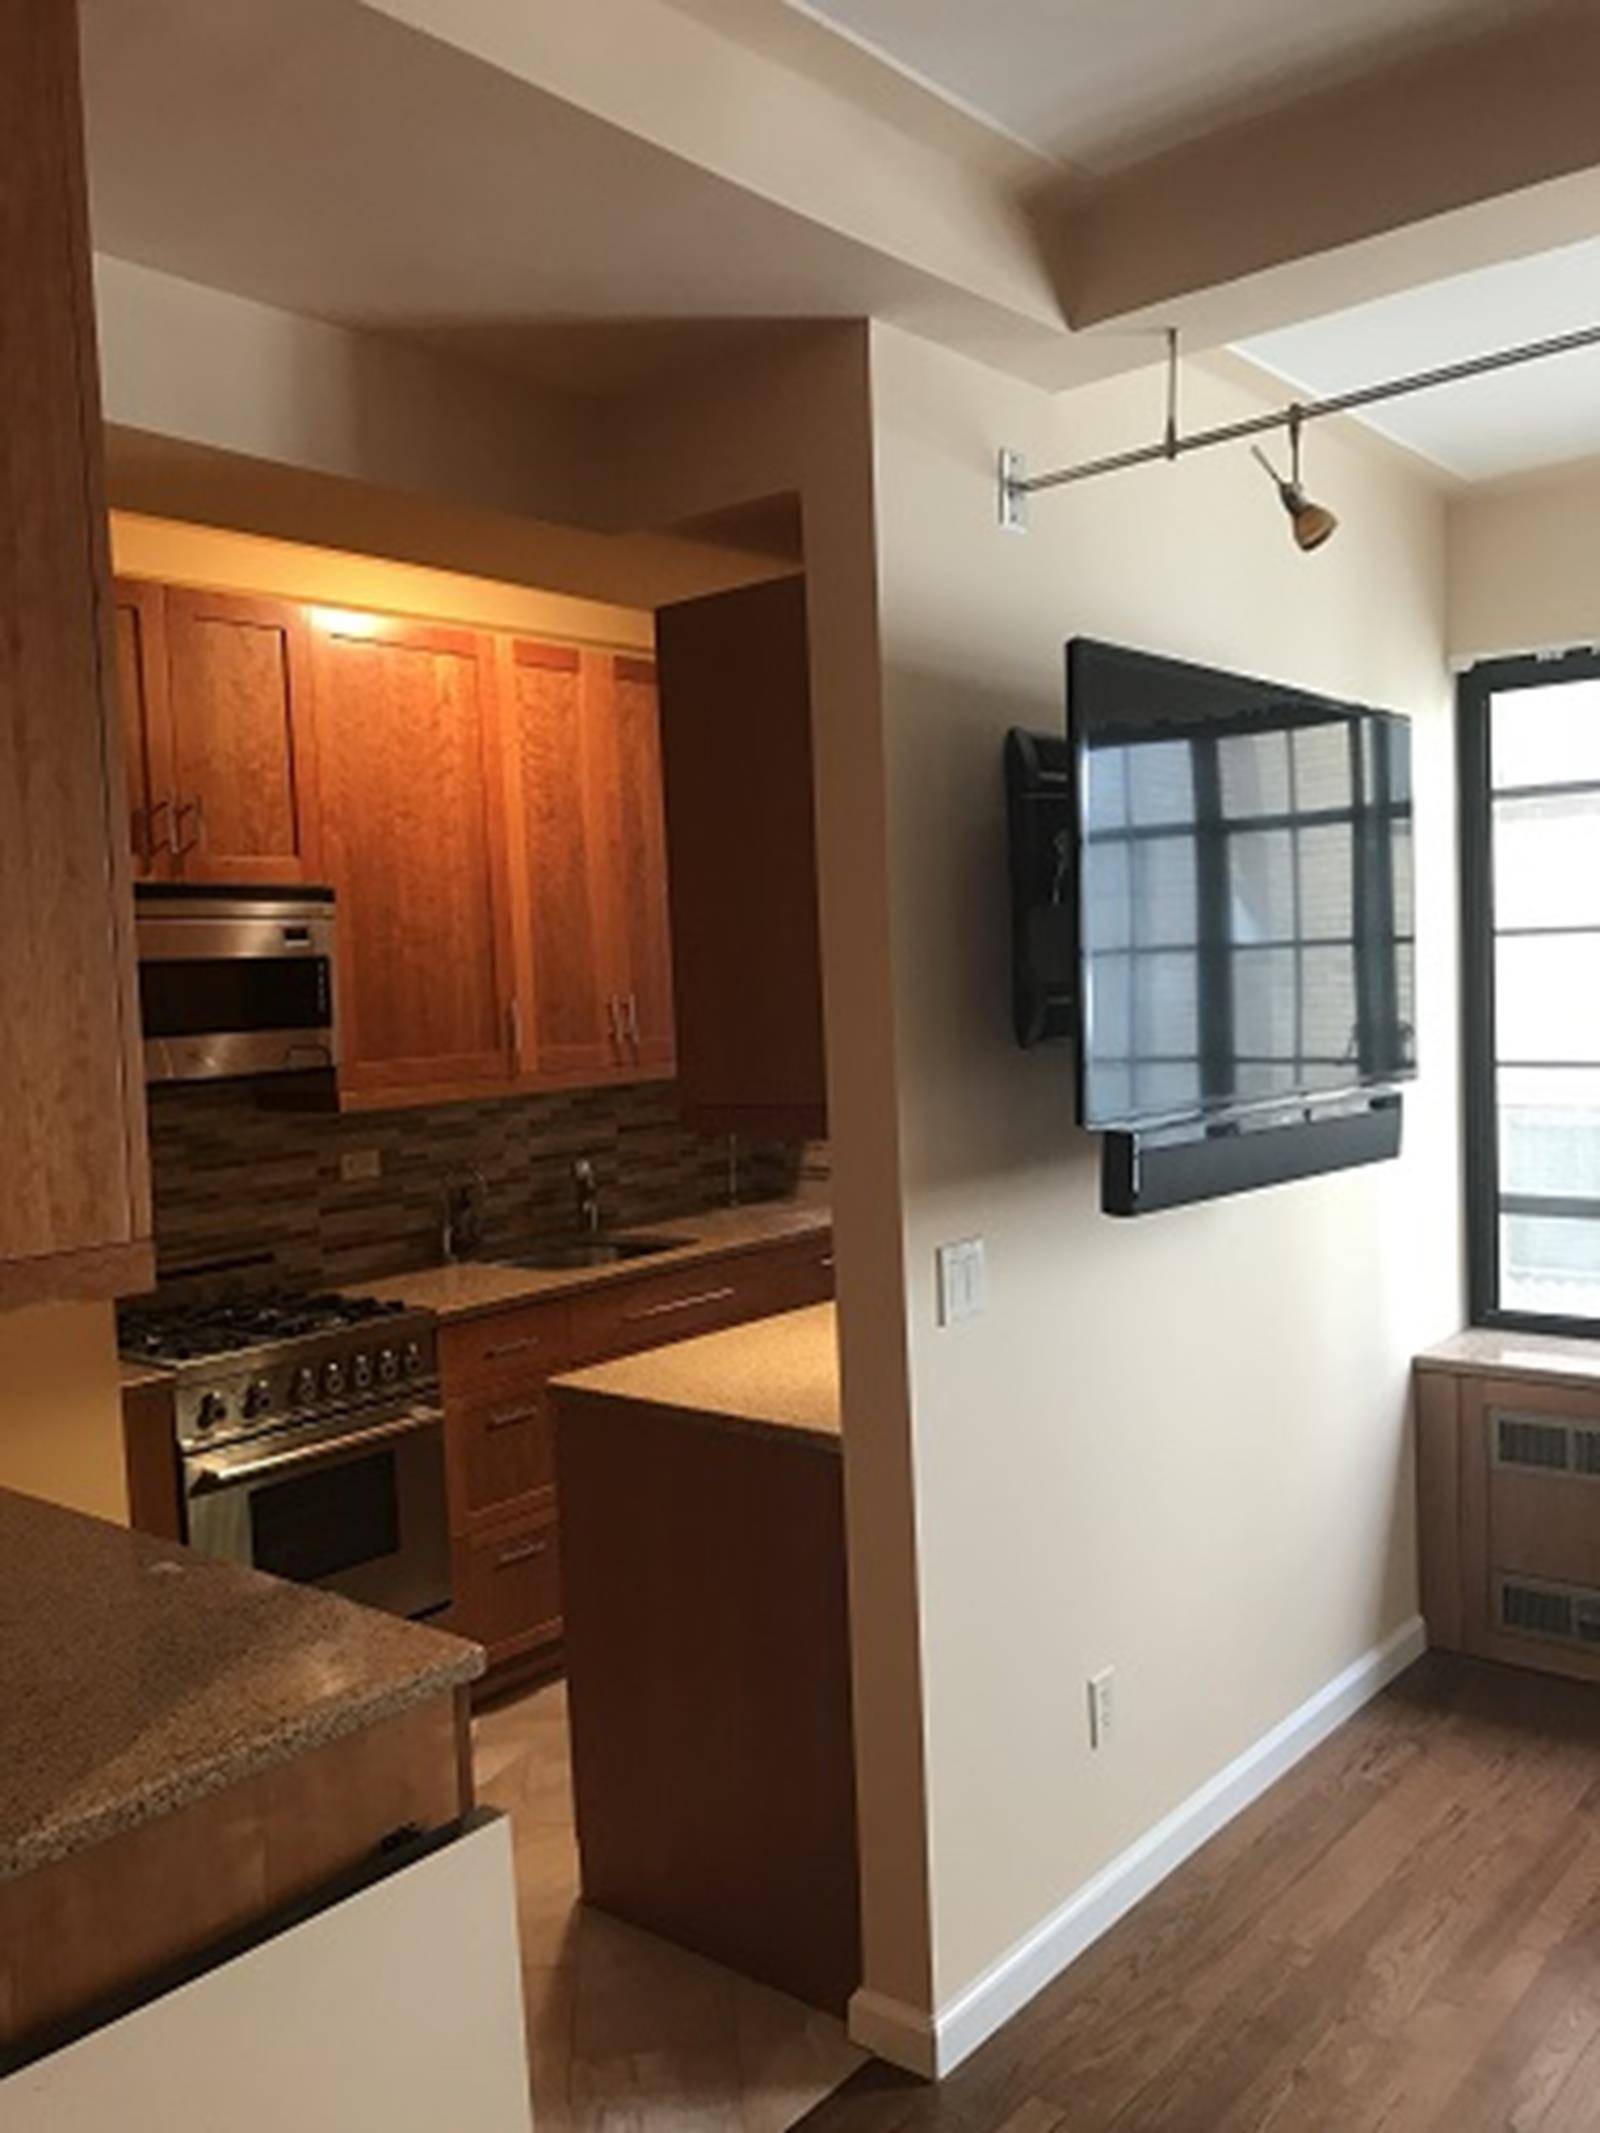 This beautifully renovated extra large studio, has a windowed chef's kitchen, with an abundance of both cabinets and counter space, a wine cooler plus a dishwasher.